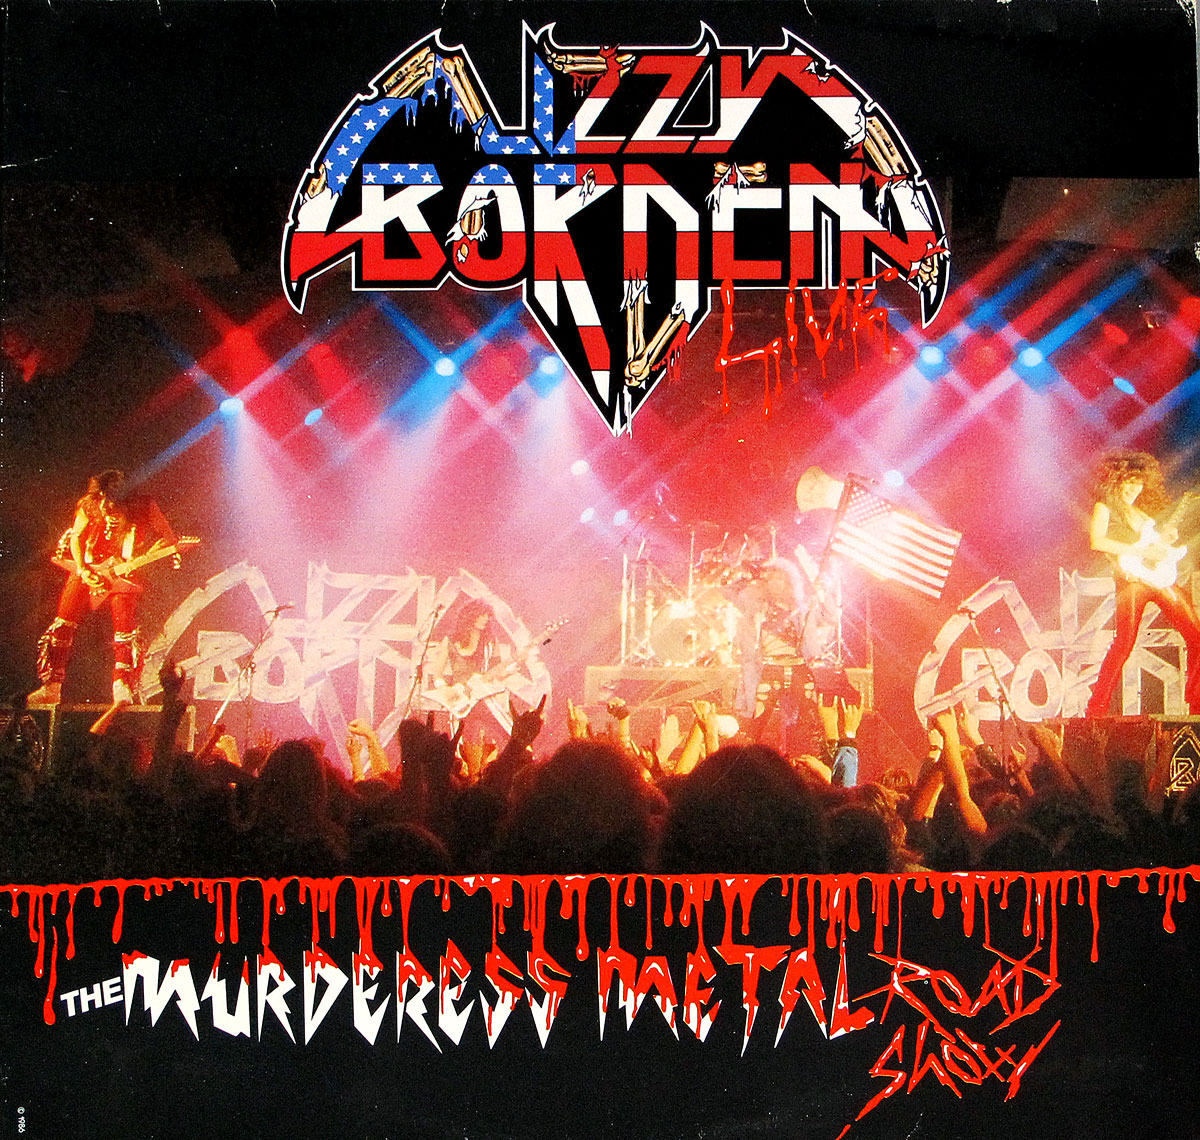 large album front cover photo of: LIZZY BORDEN - THE MURDERESS METAL ROAD SHOW 